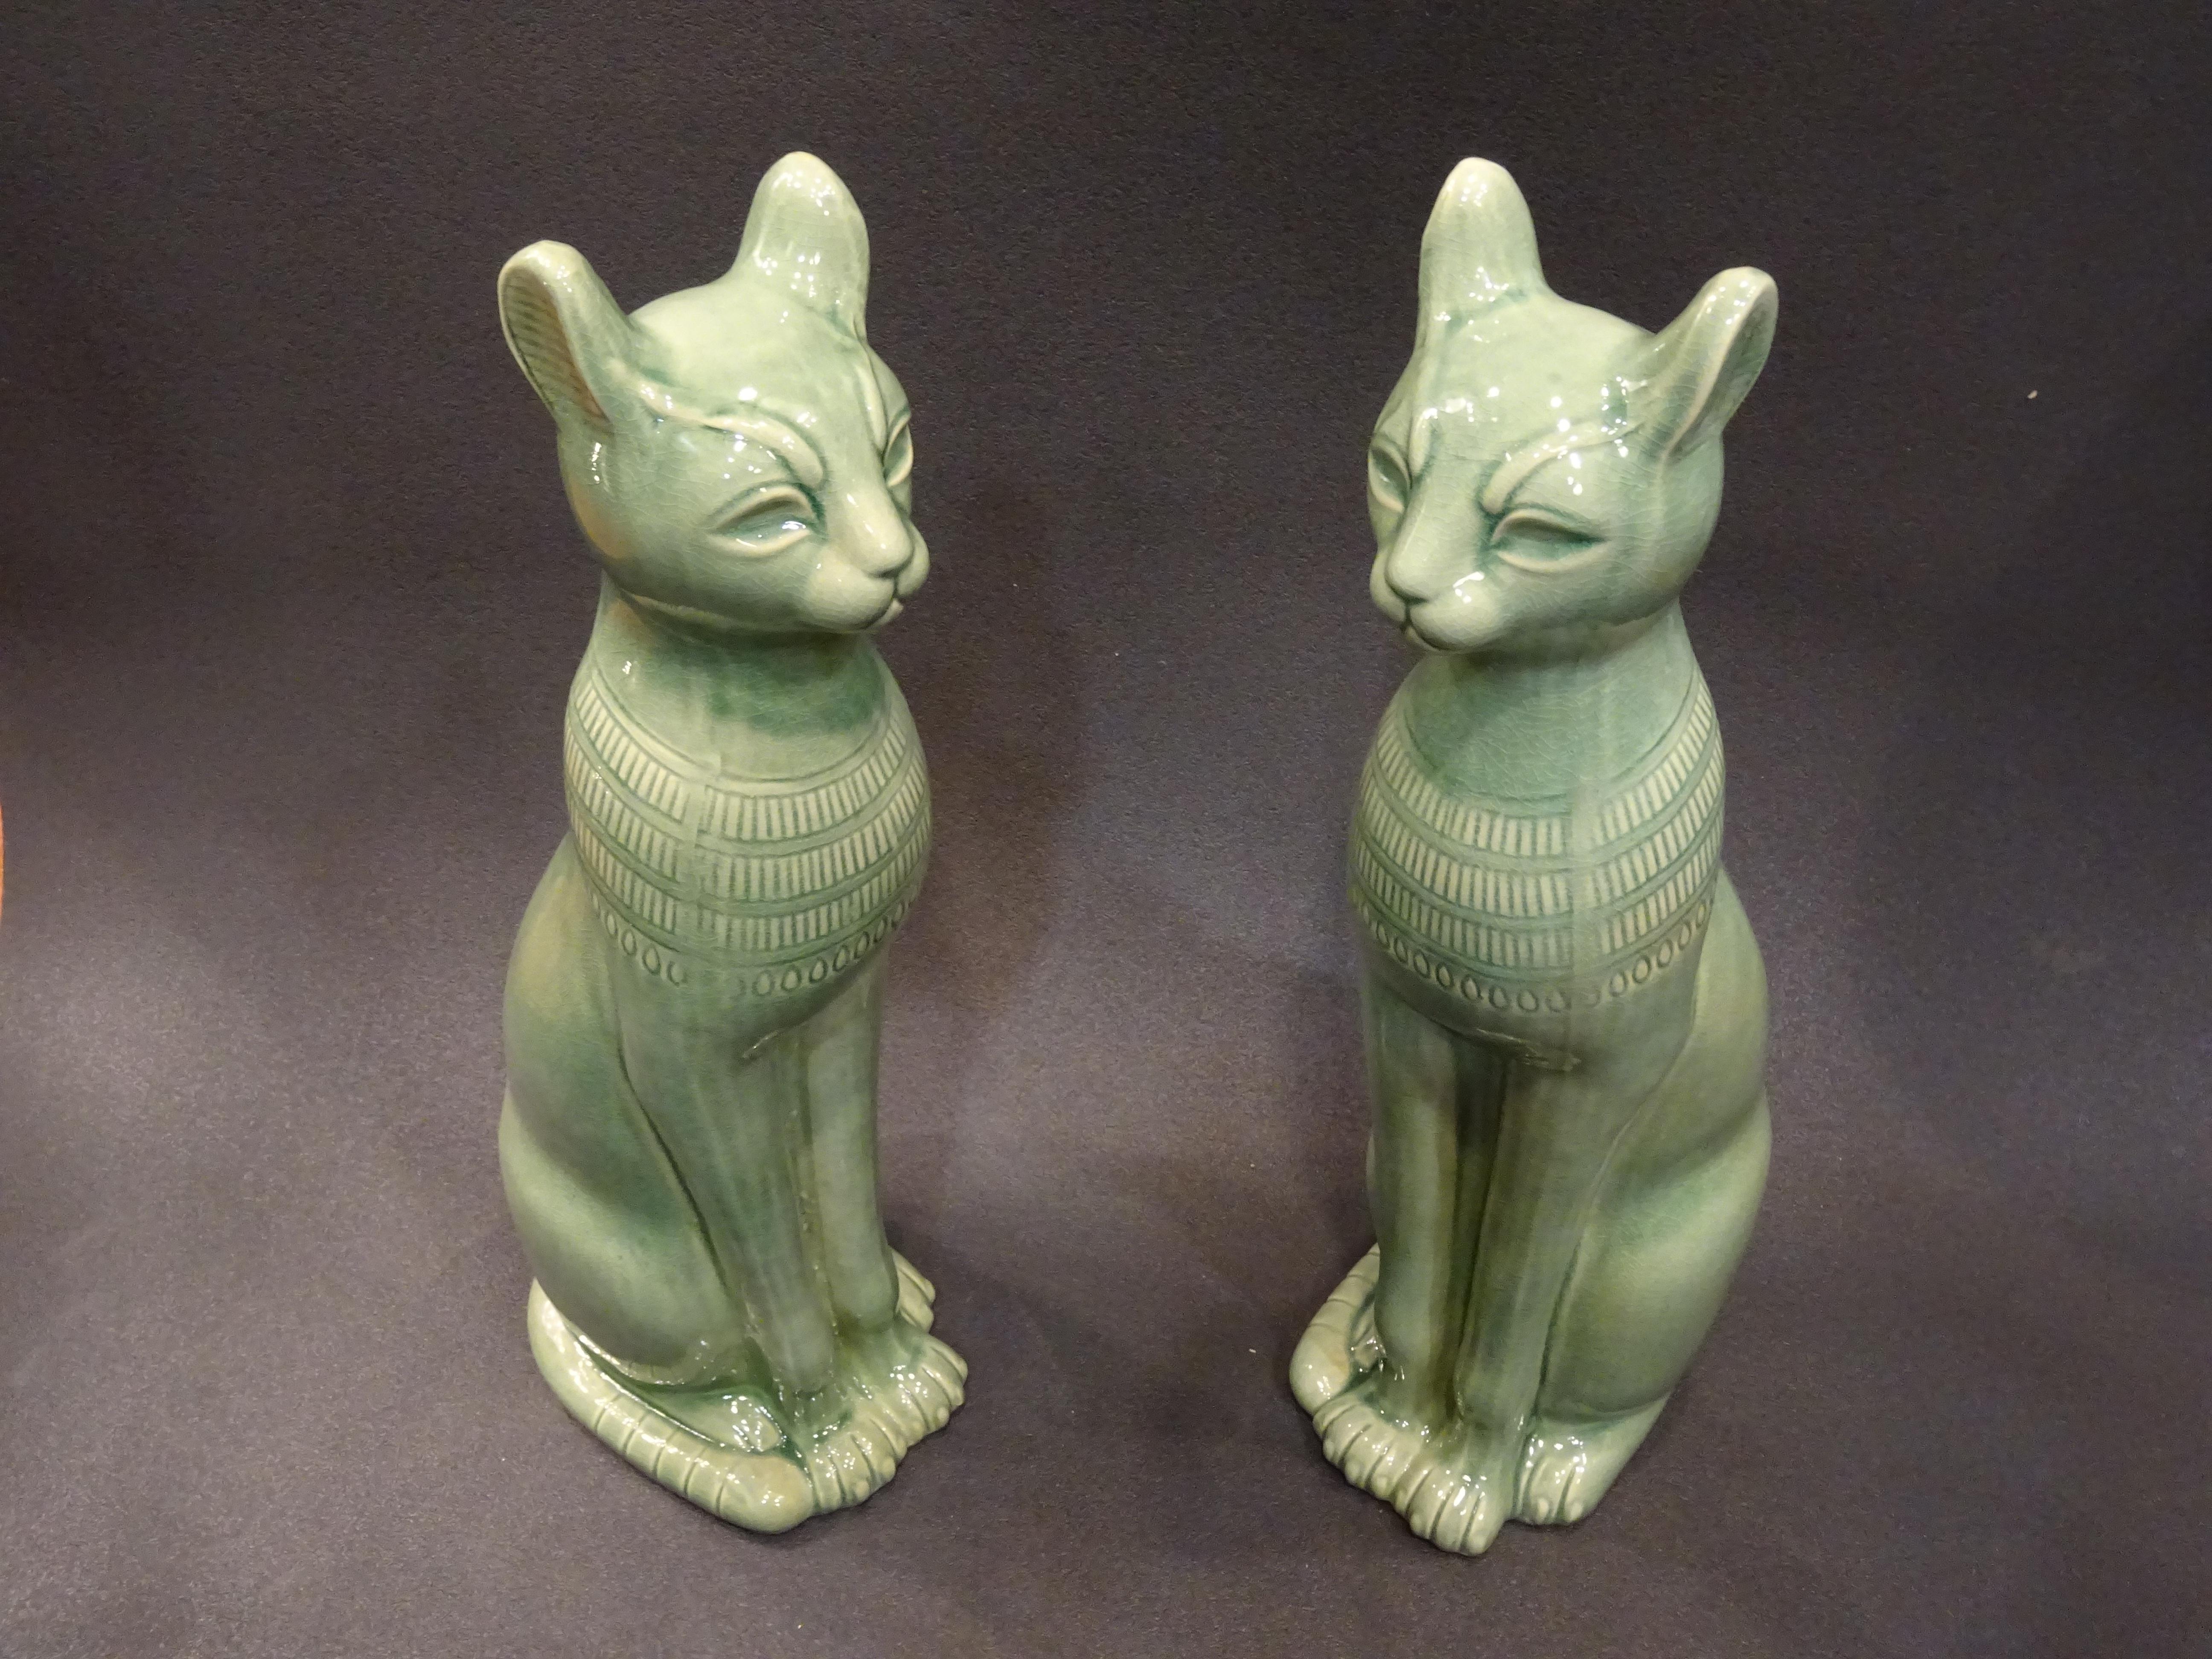 Hand-Painted 1960s Italy Couple of Cats Sculptures in Celadon Color Ceramic